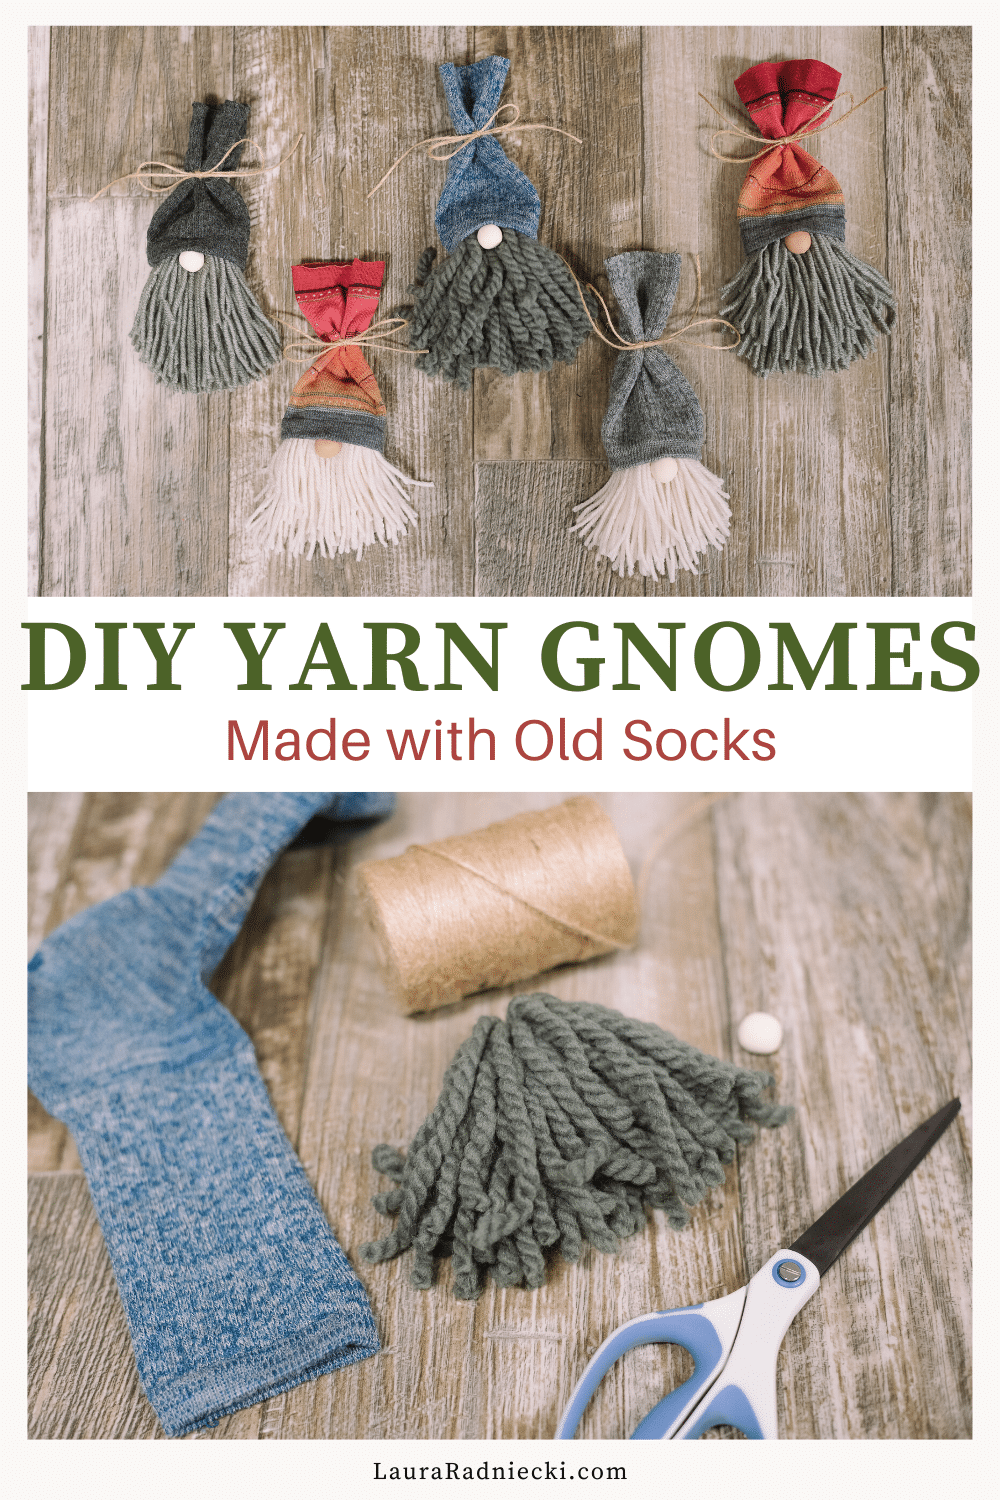 How to Make a Yarn and Sock Gnome